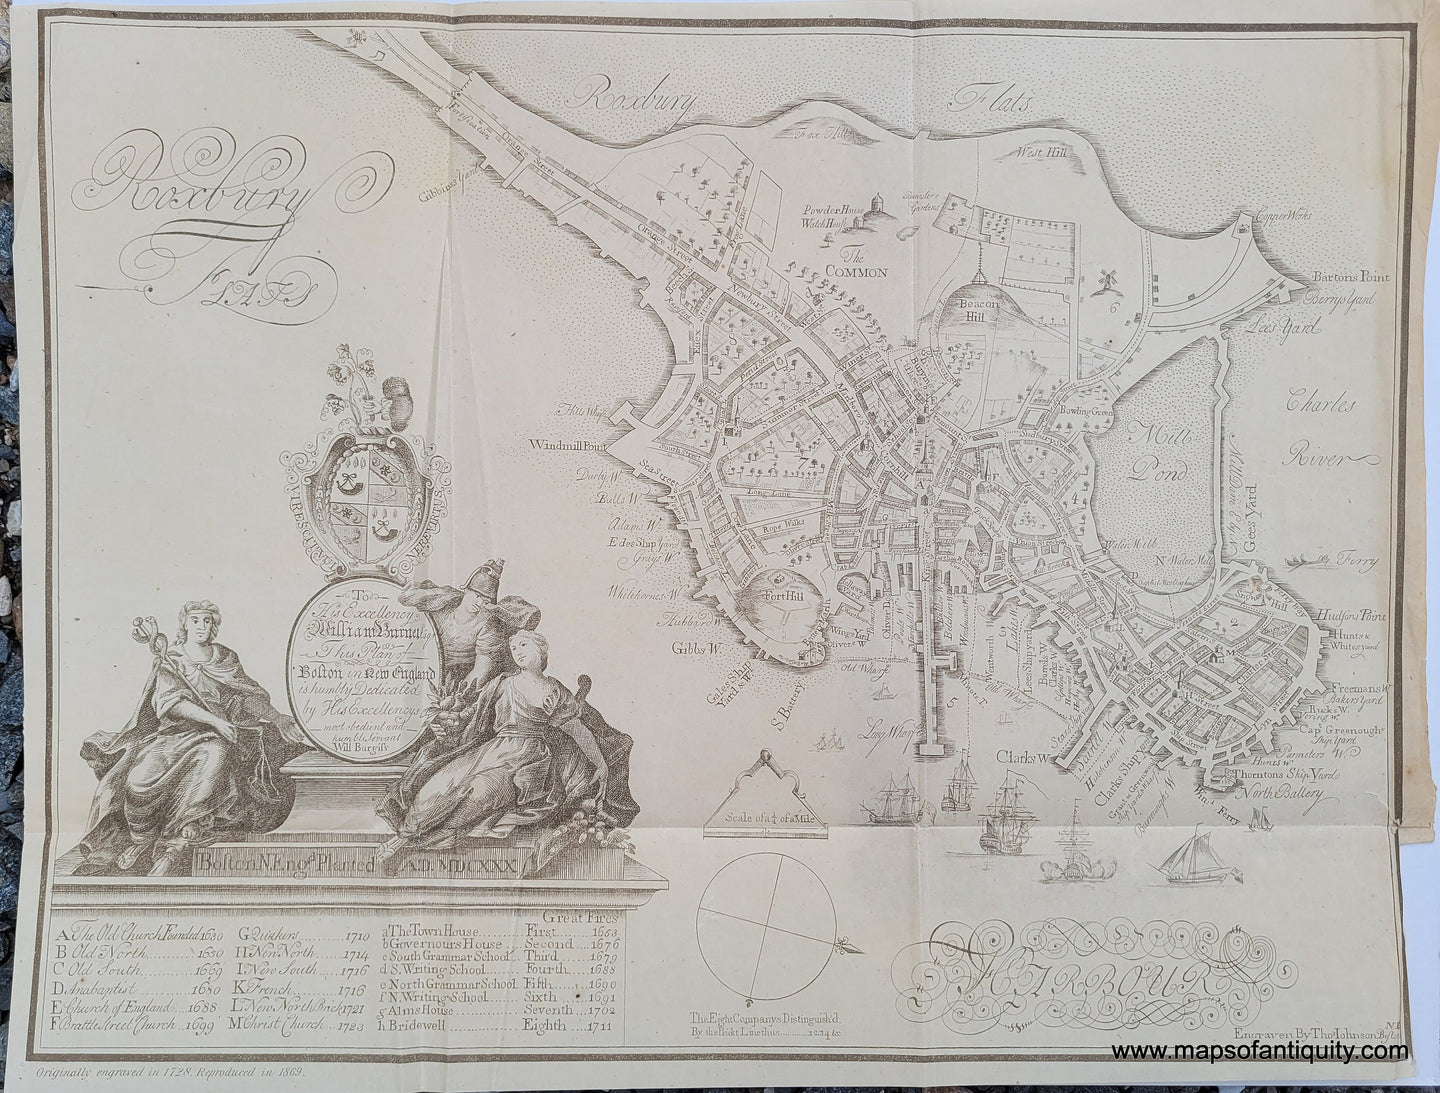 Genuine-Antique-Map-To-his-excellency-William-Burnet-esqr--this-plan-of-Boston-in-New-England-is-humbly-dedicated-by-his-excellencys-most-obedient-and-humble-servant-Will-Burgiss-1869-Burgiss-Johnson-Maps-Of-Antiquity